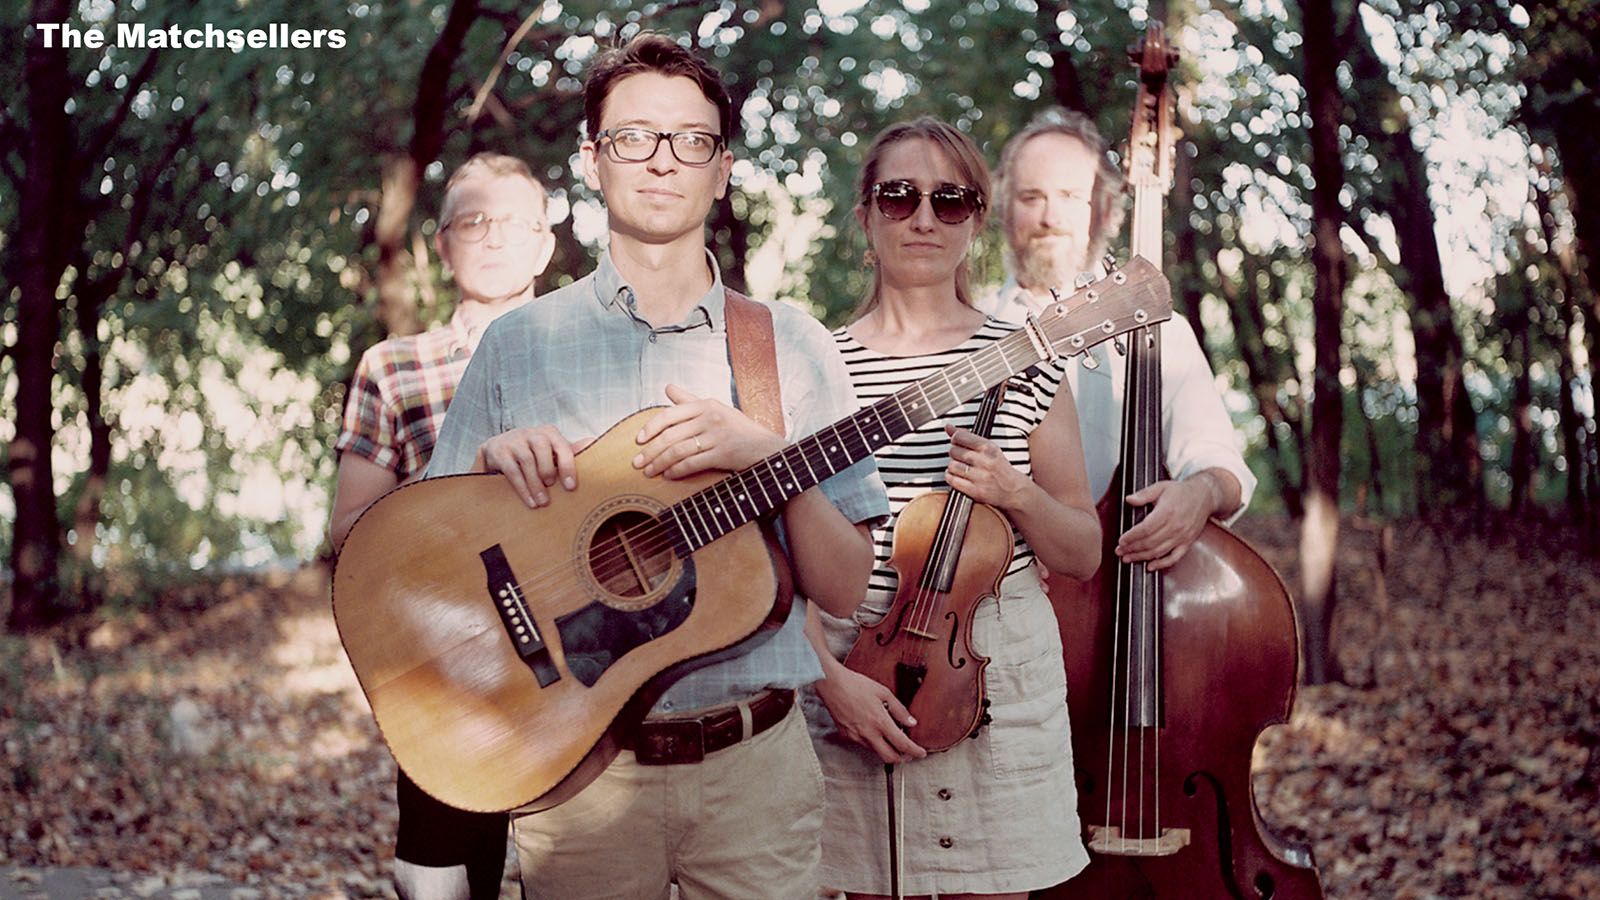 The Matchsellers will be one of the acts at the Tri-State Bluegrass Festival.